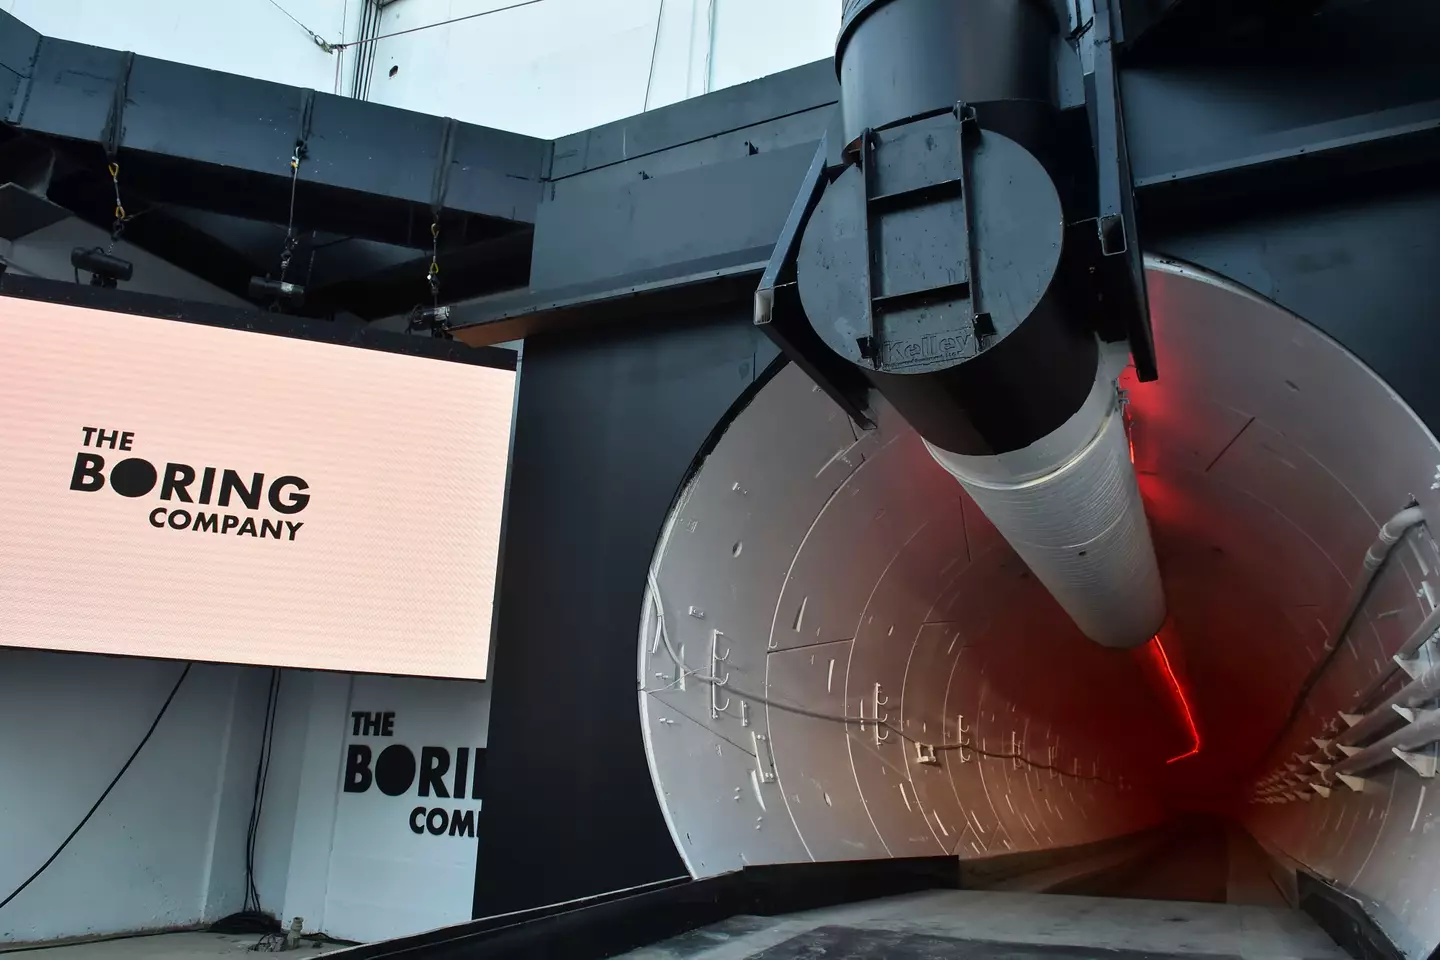 The Boring Company wants to solve traffic issues with its underground tunnels.